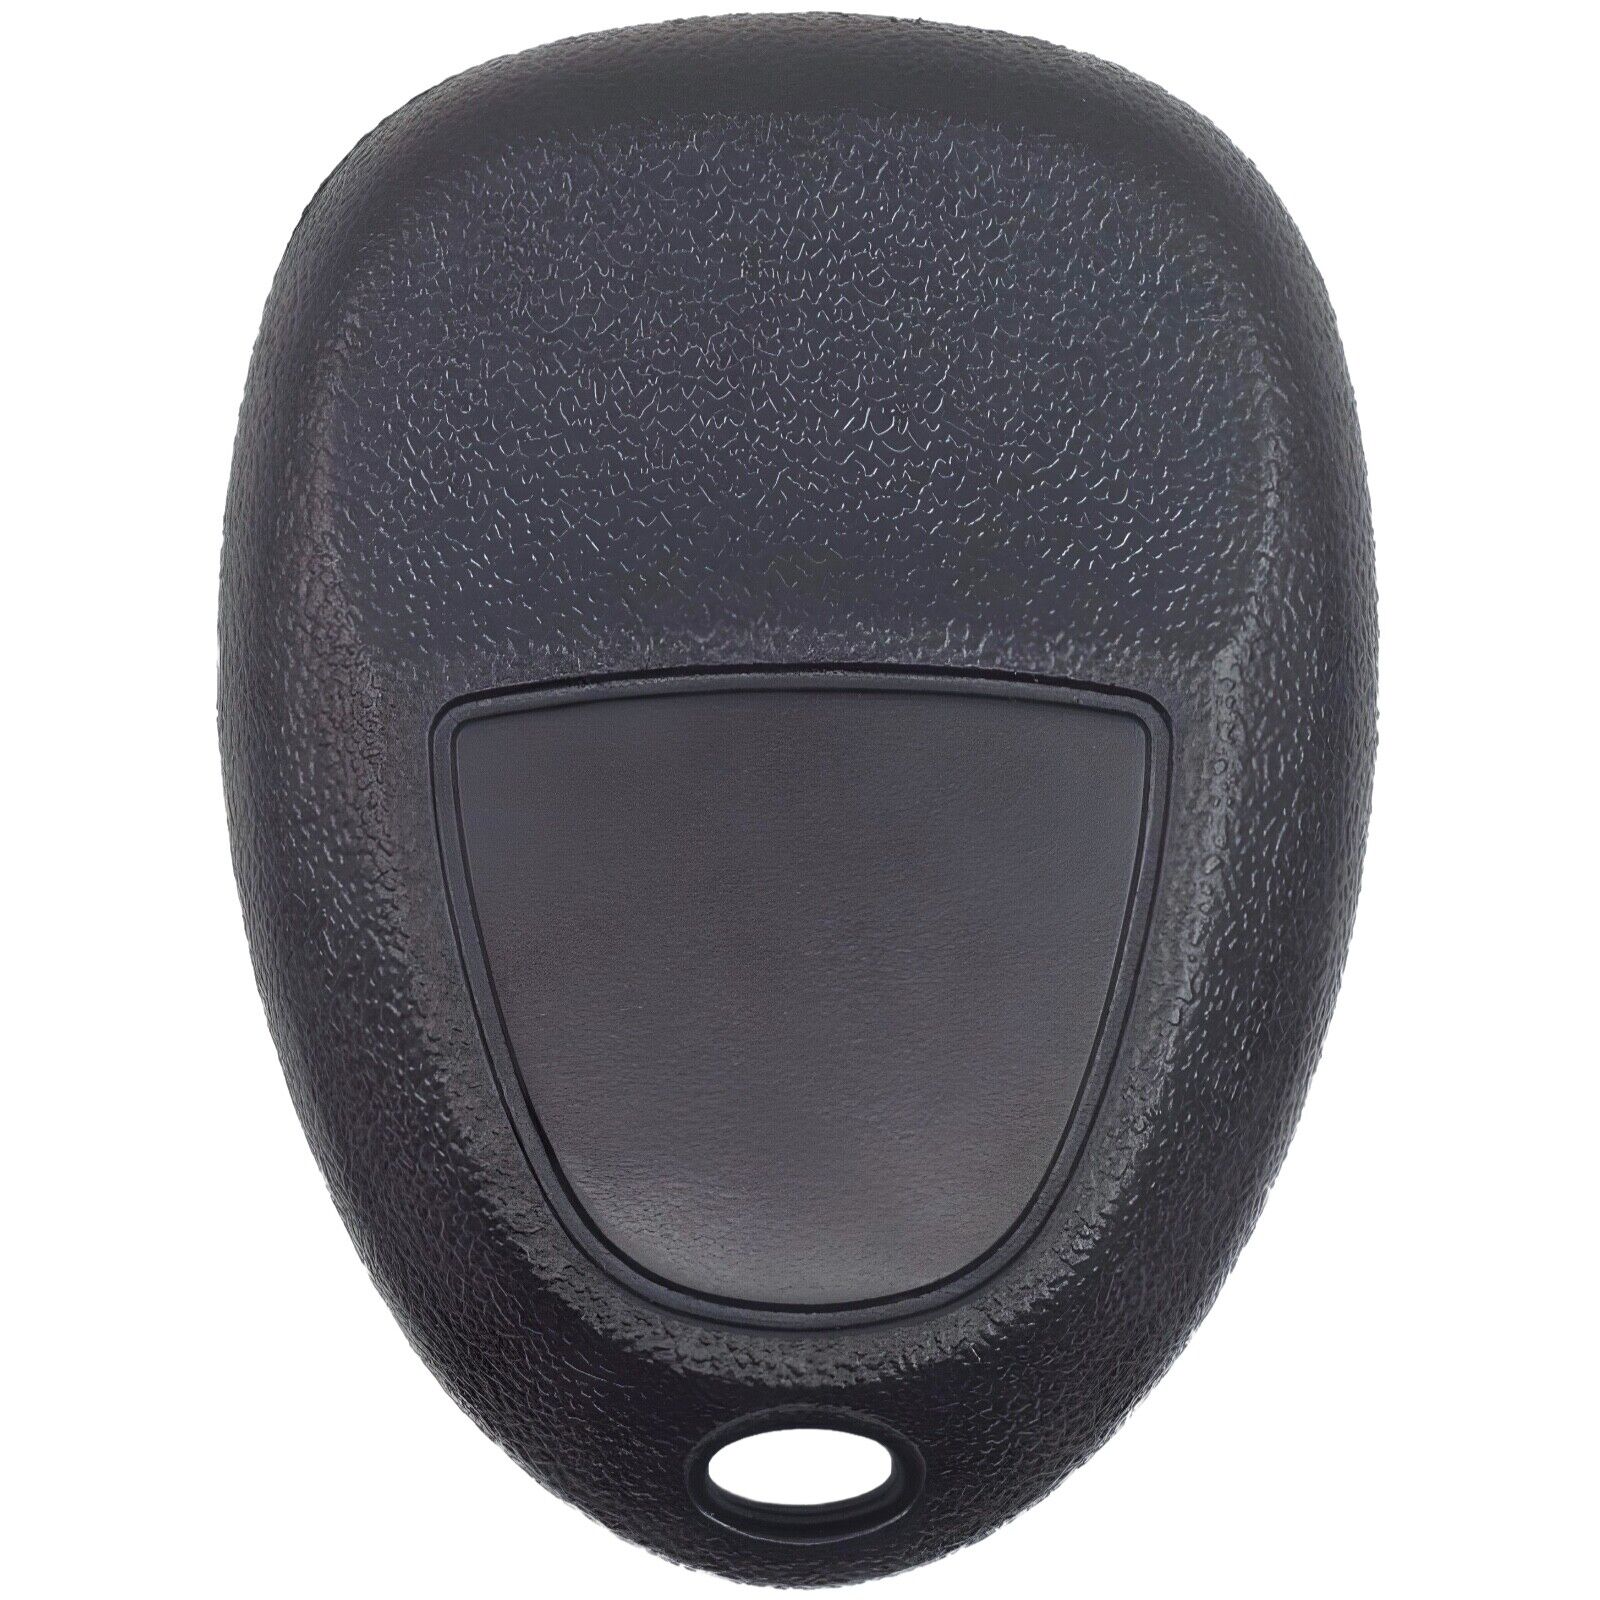 Key Fob Replacement For 2005-2007 Buick Terraza FCC ID: KOBGT04A